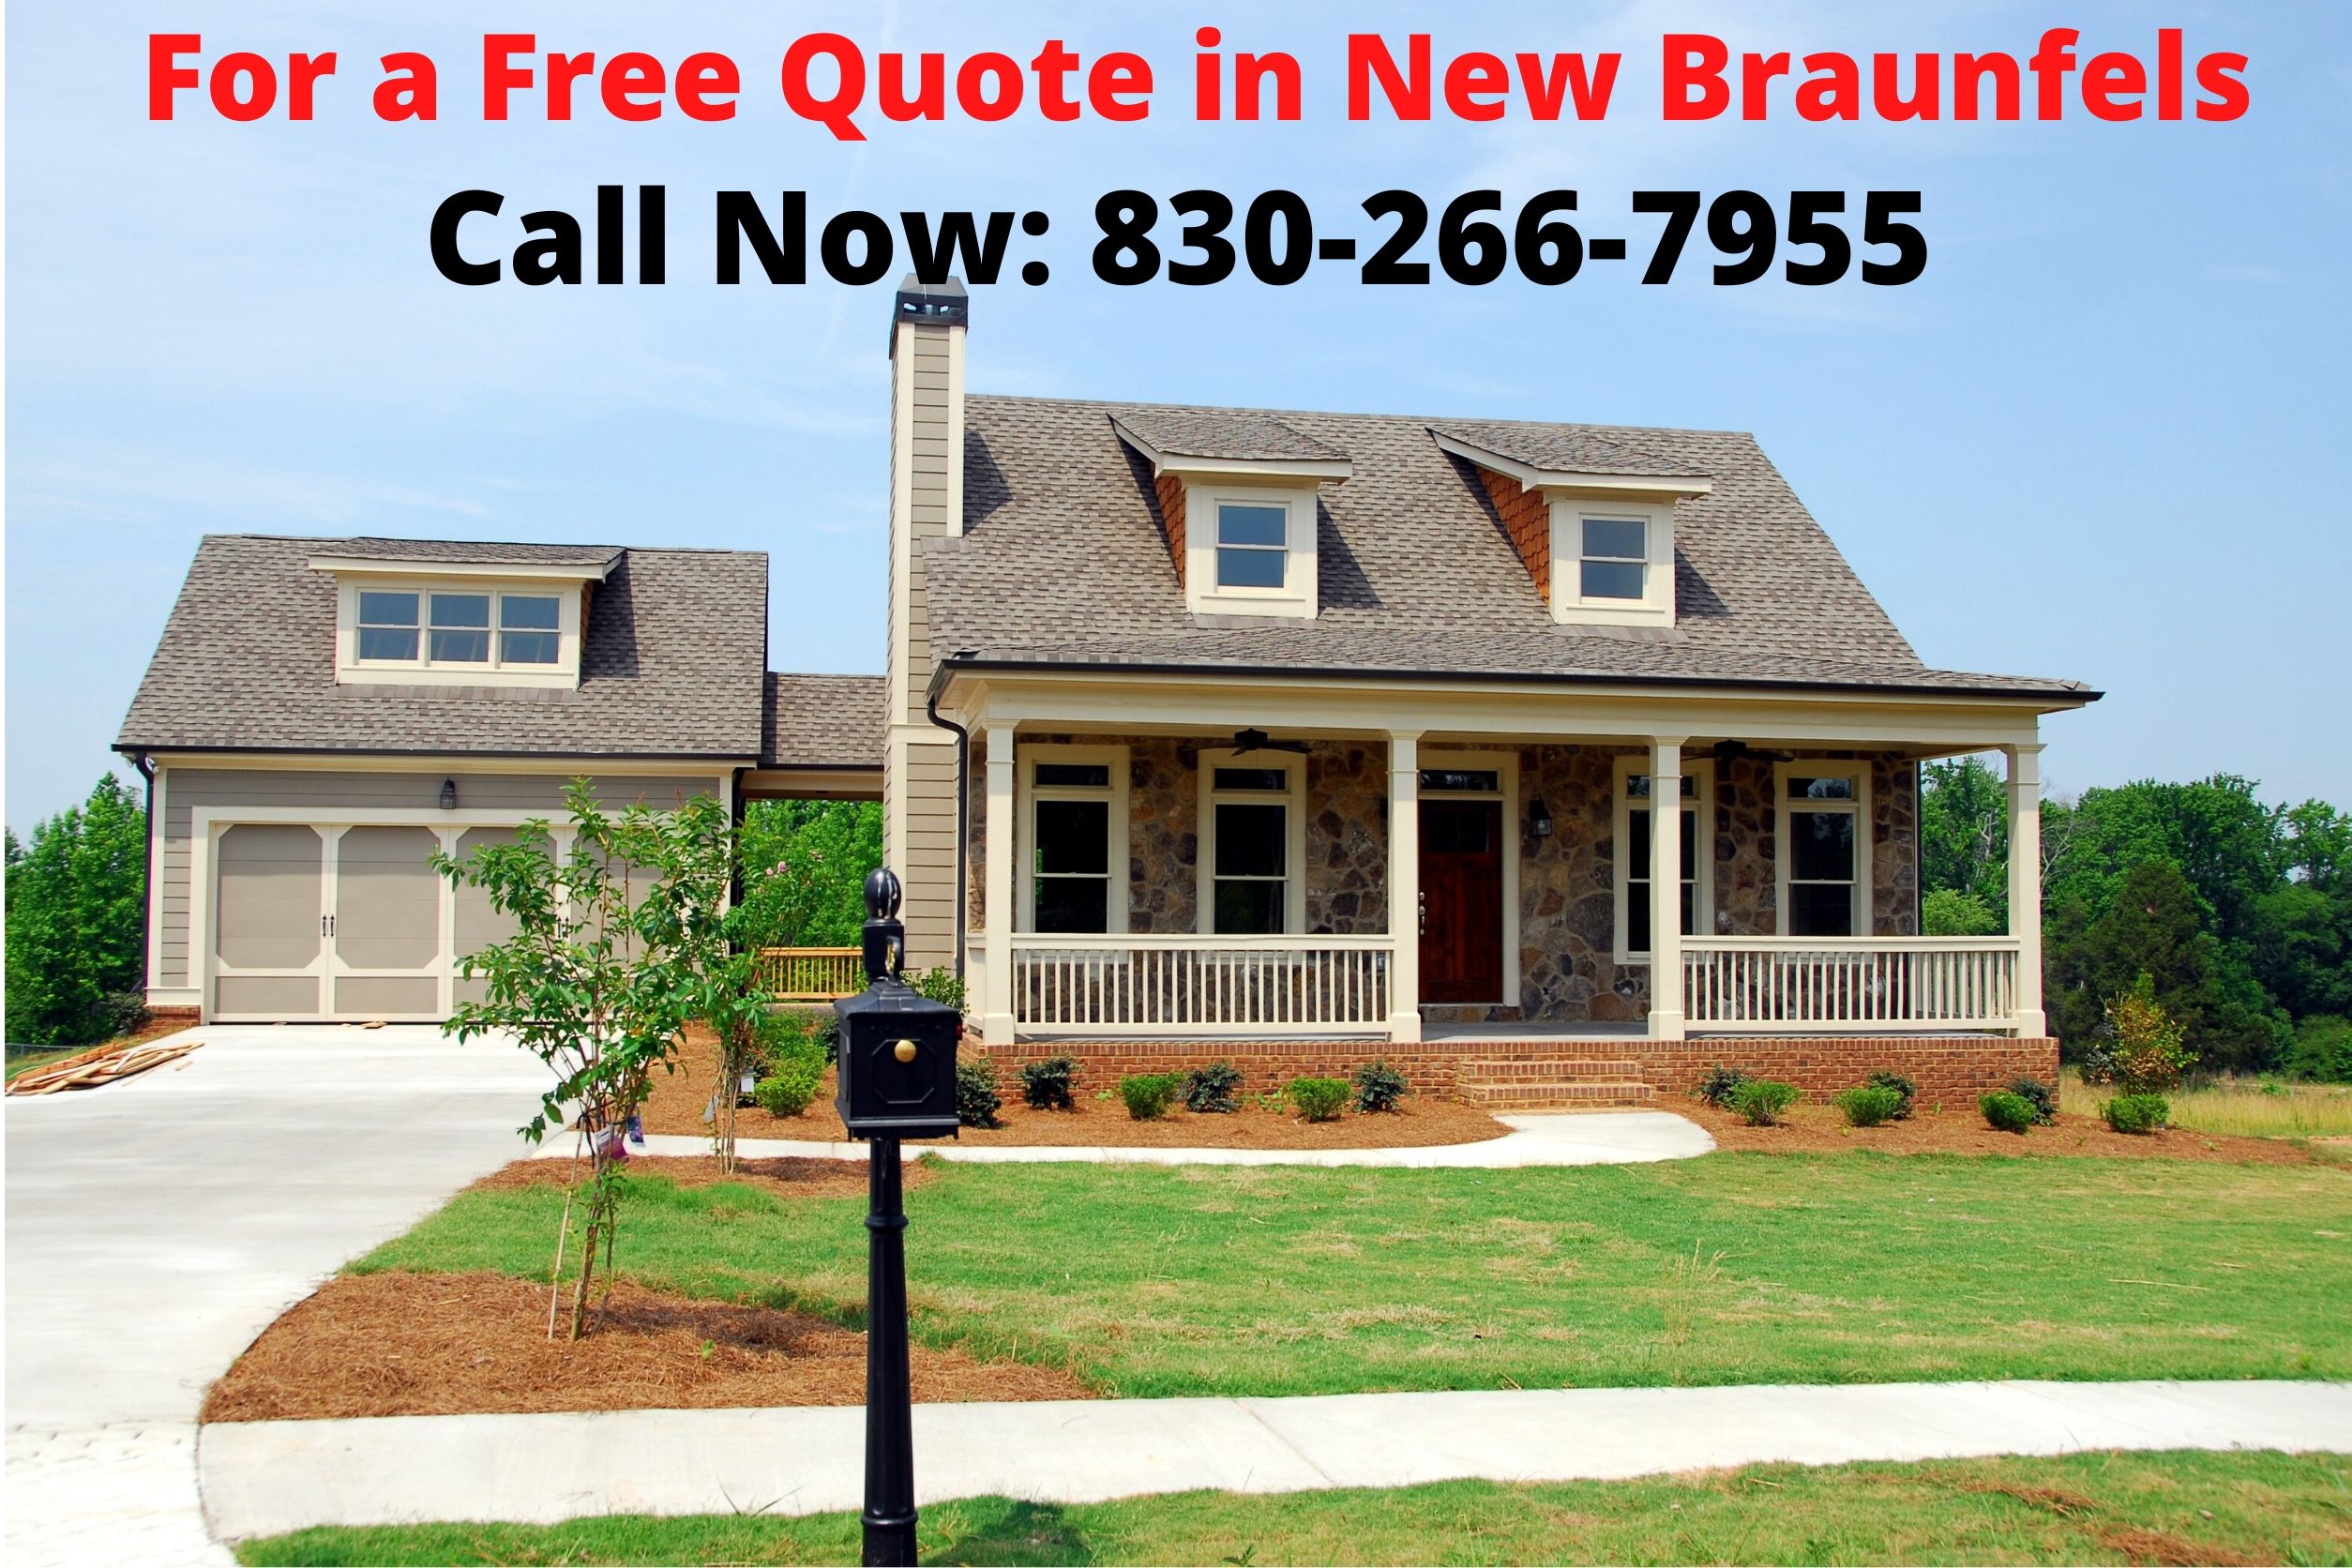 New Braunfels Roofing Pros